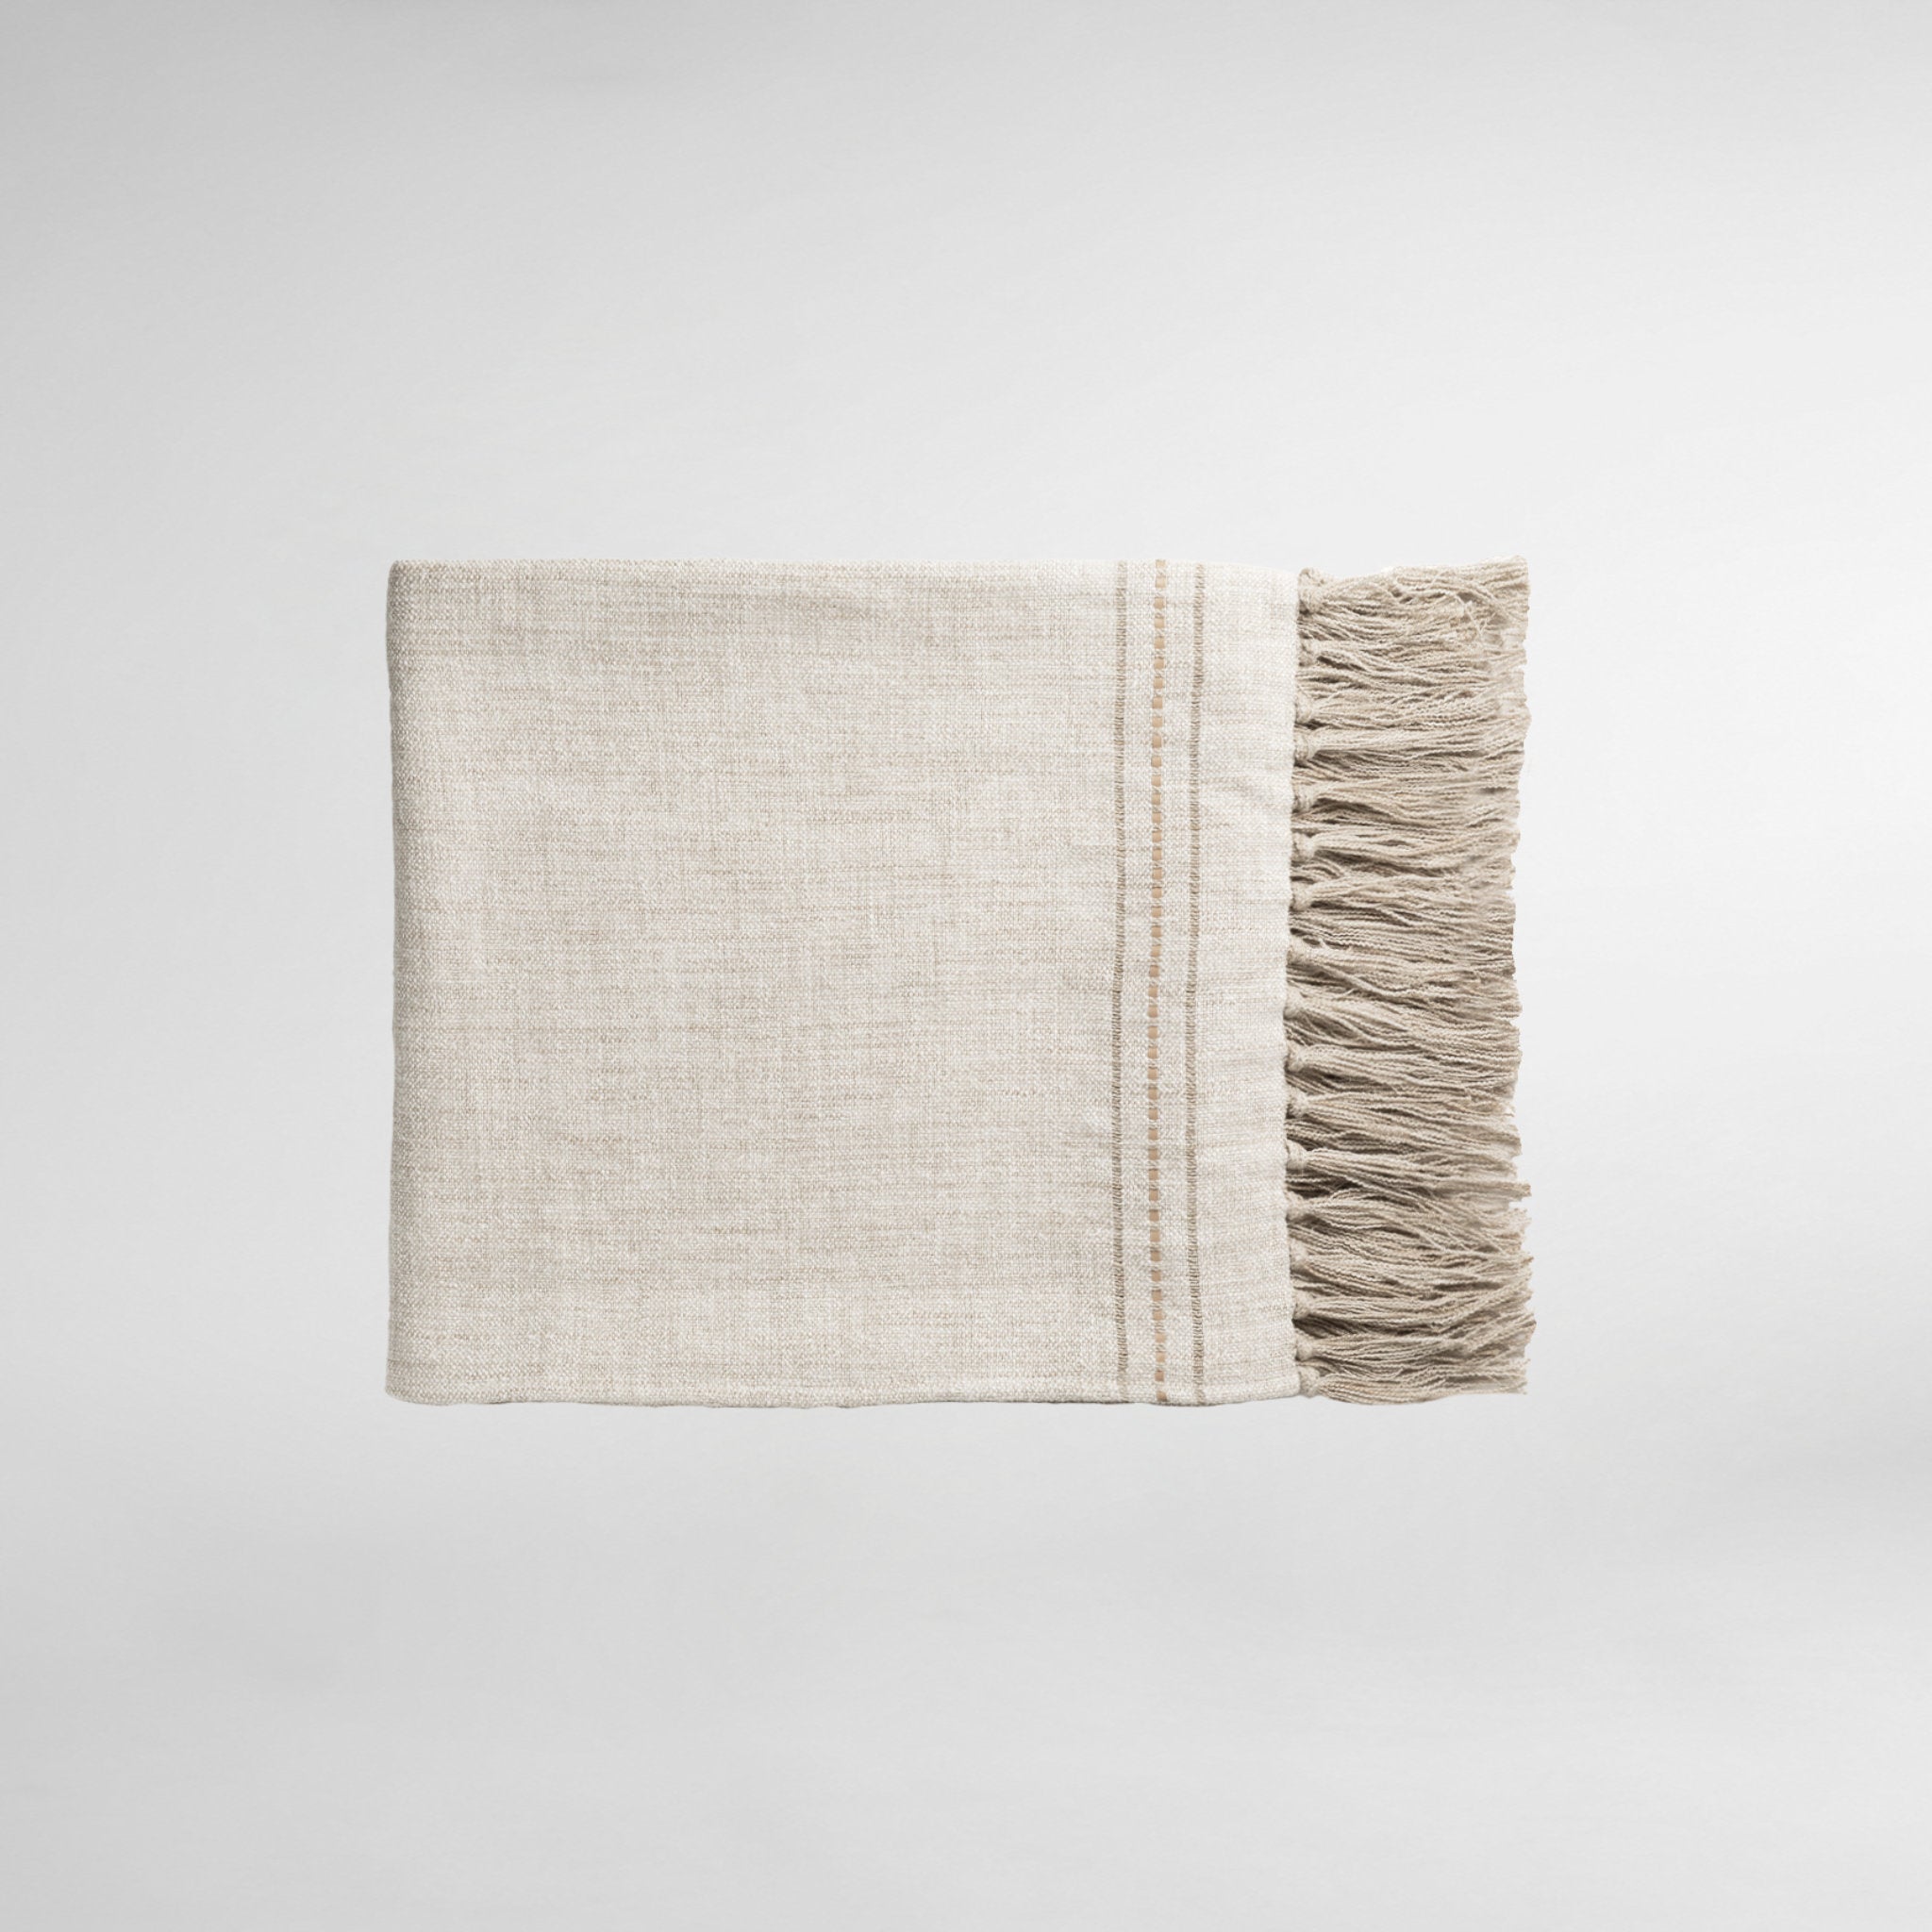 Hoxton Throw with Fringe and Leather Details - Flax